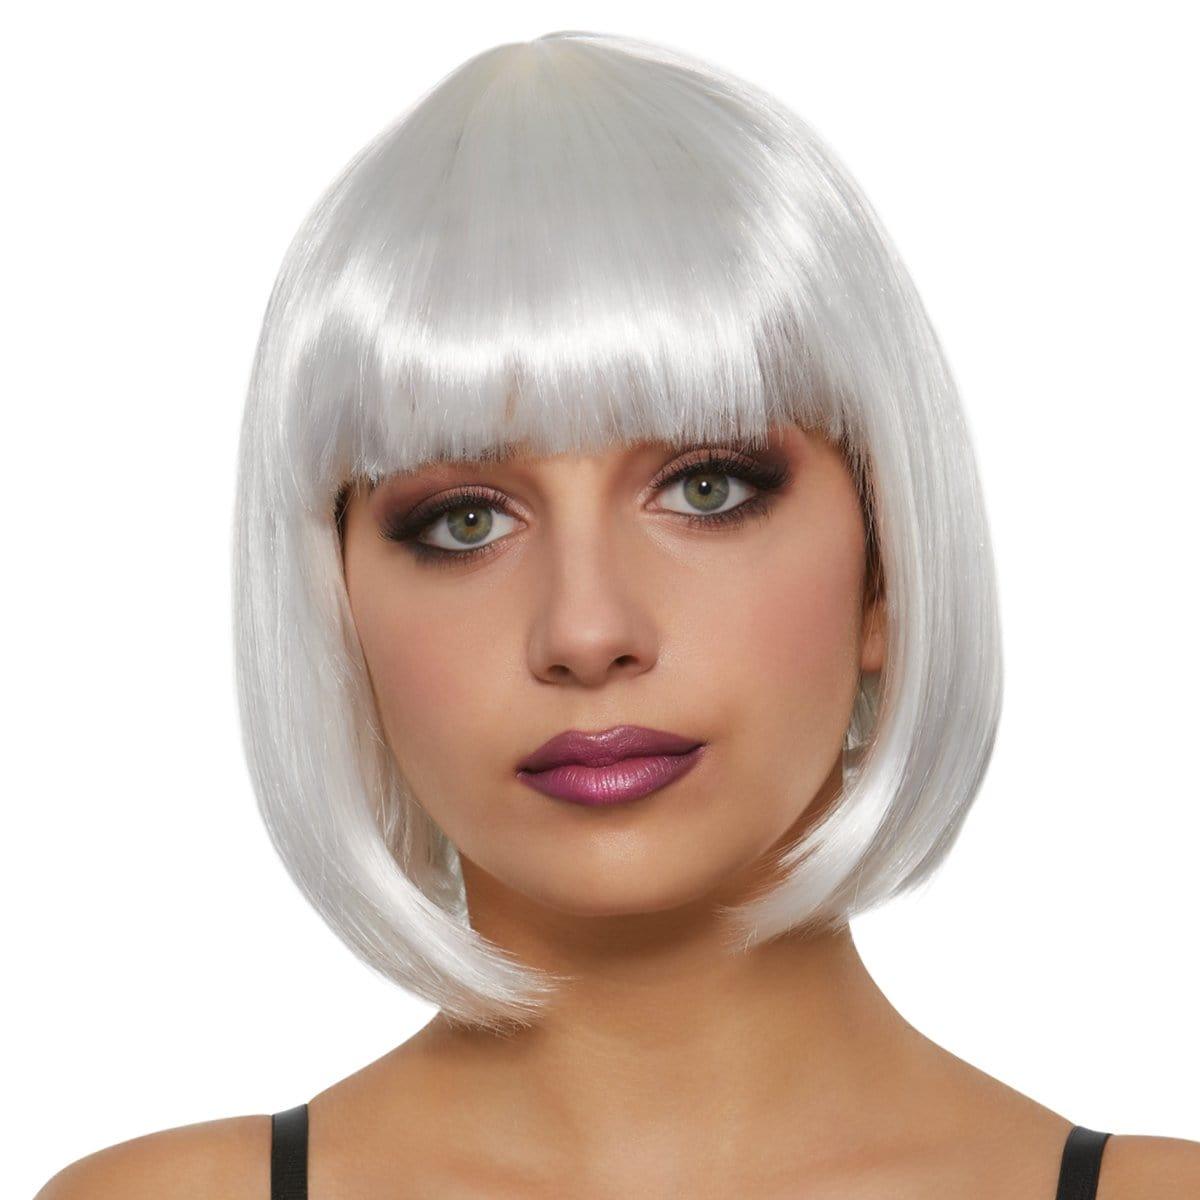 Buy Costume Accessories White Daisy wig for women sold at Party Expert